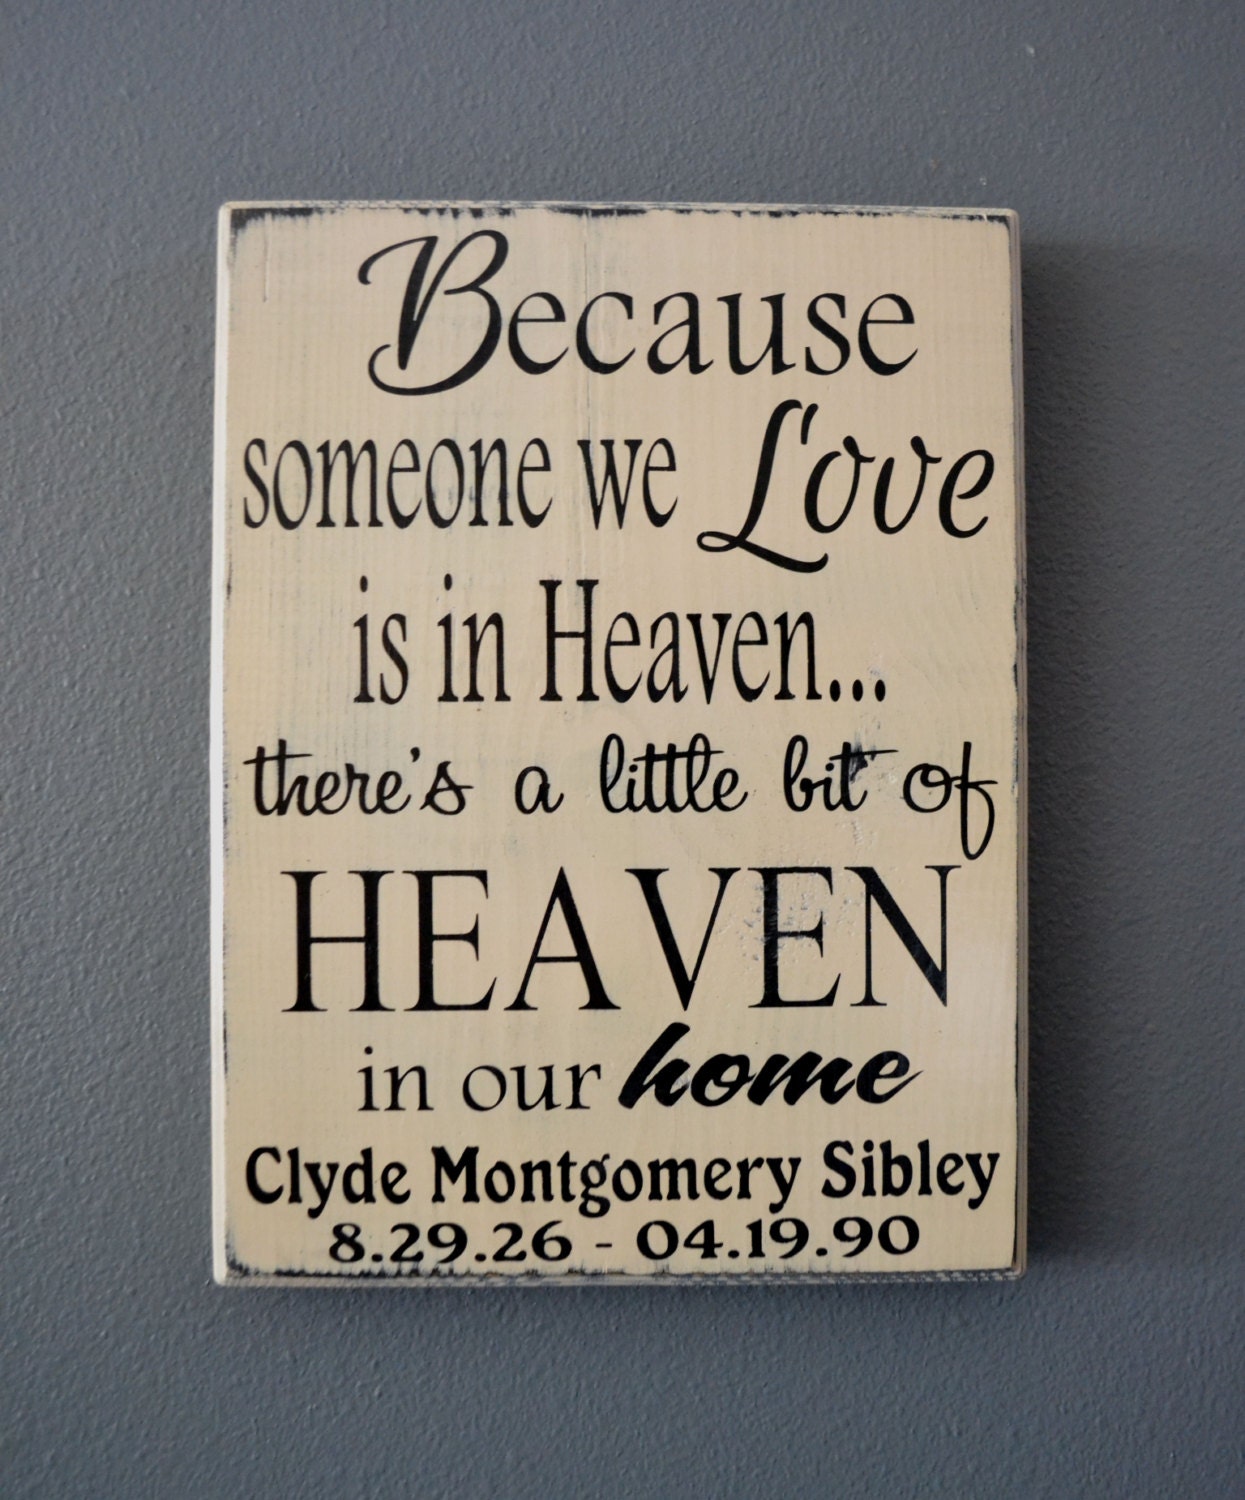 Popular items for Heaven on Etsy